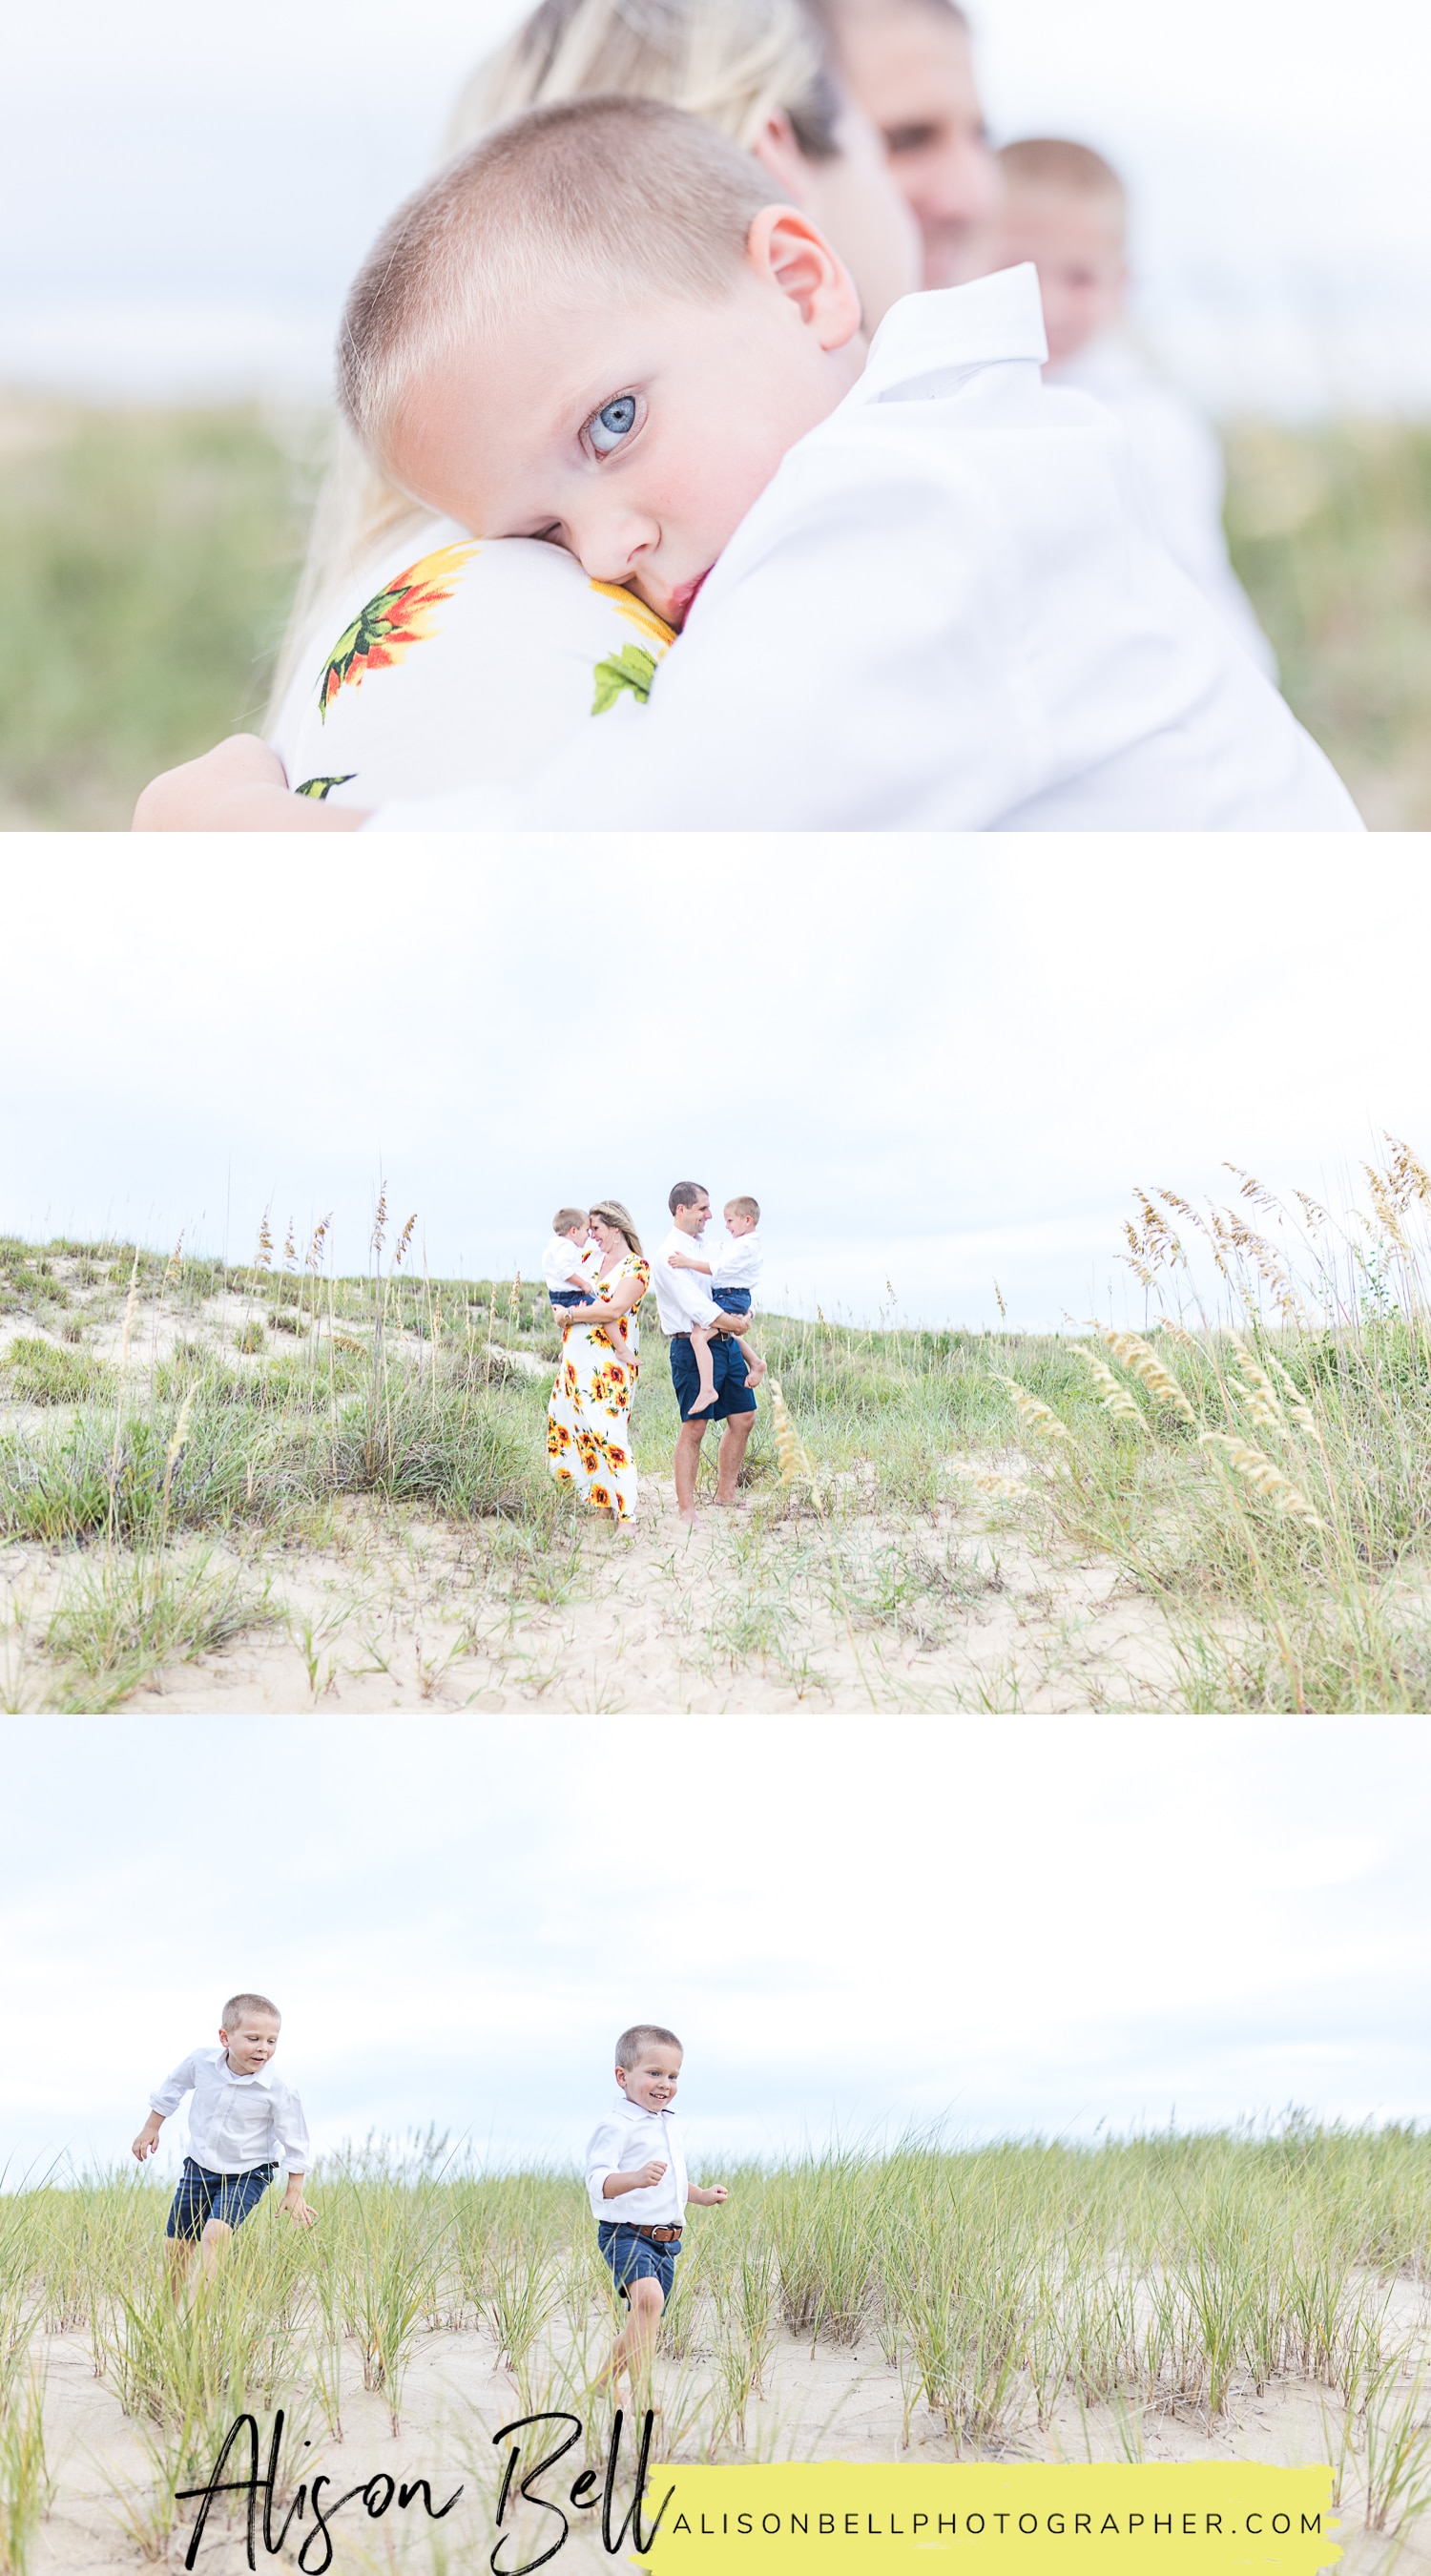 North End virginia beach family maternity photos with alison bell, photographer